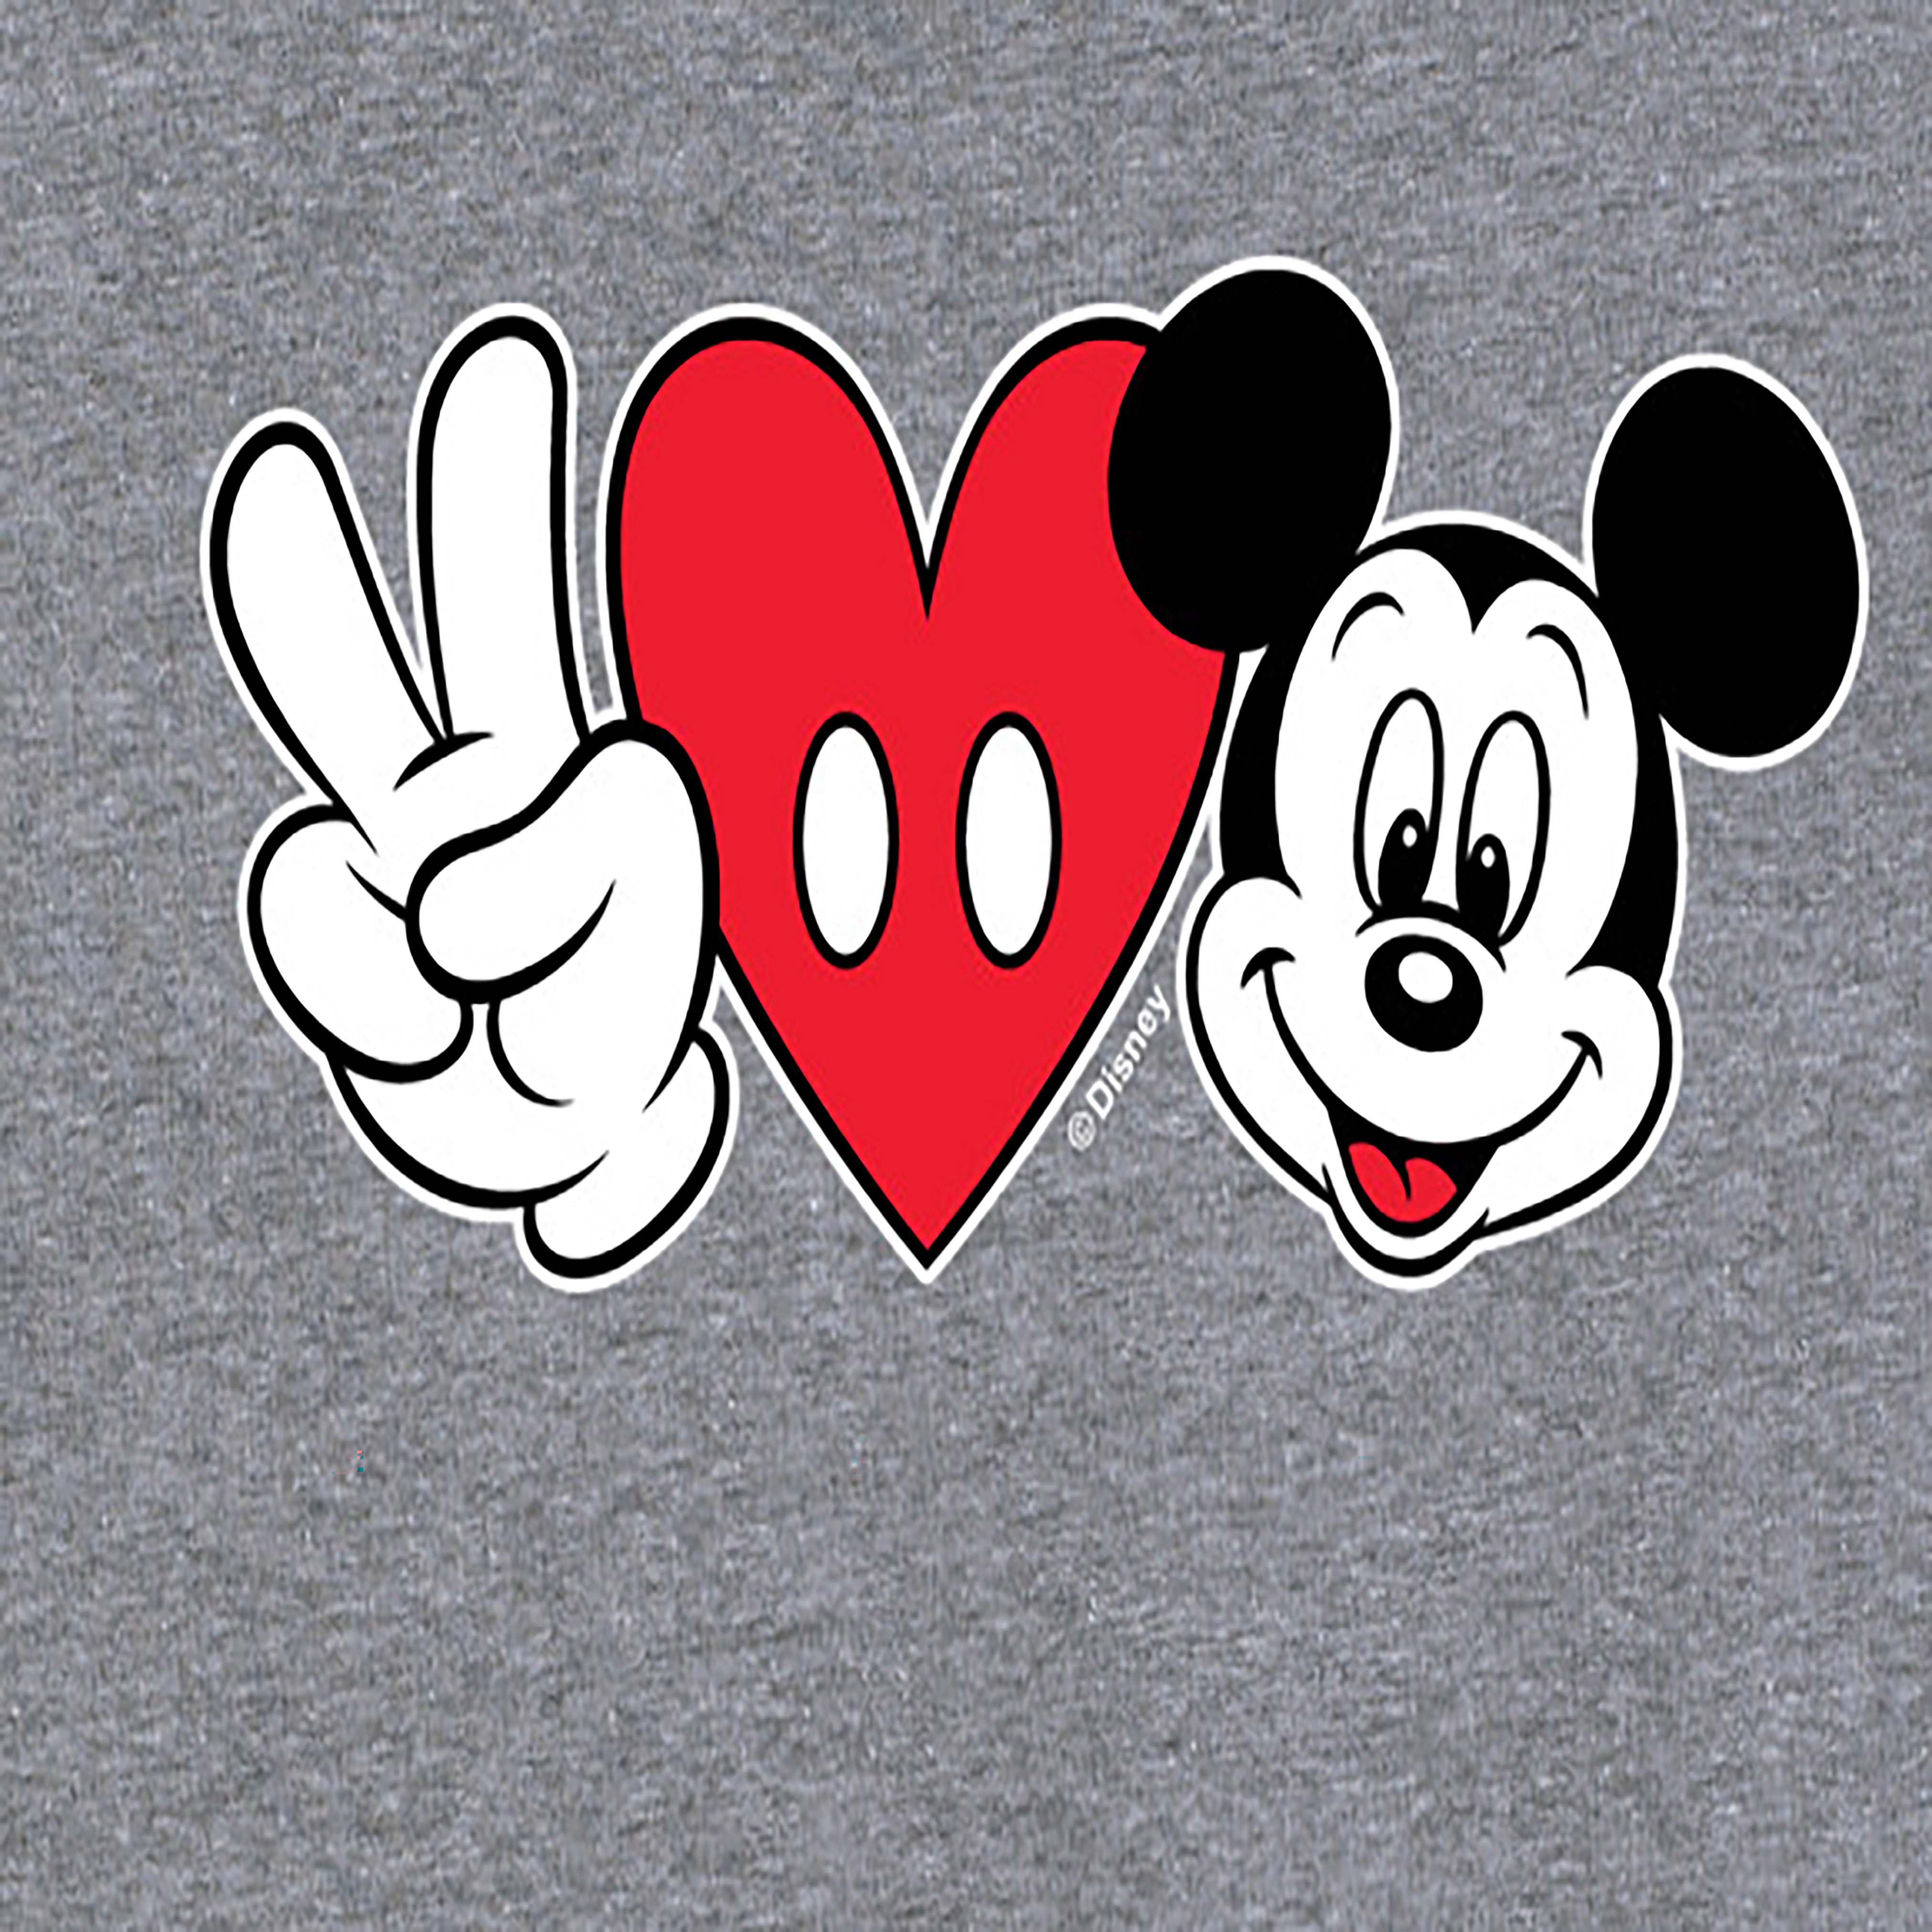 Mickey mouse peace love St Louis Cardinals shirt, hoodie, sweater and  v-neck t-shirt